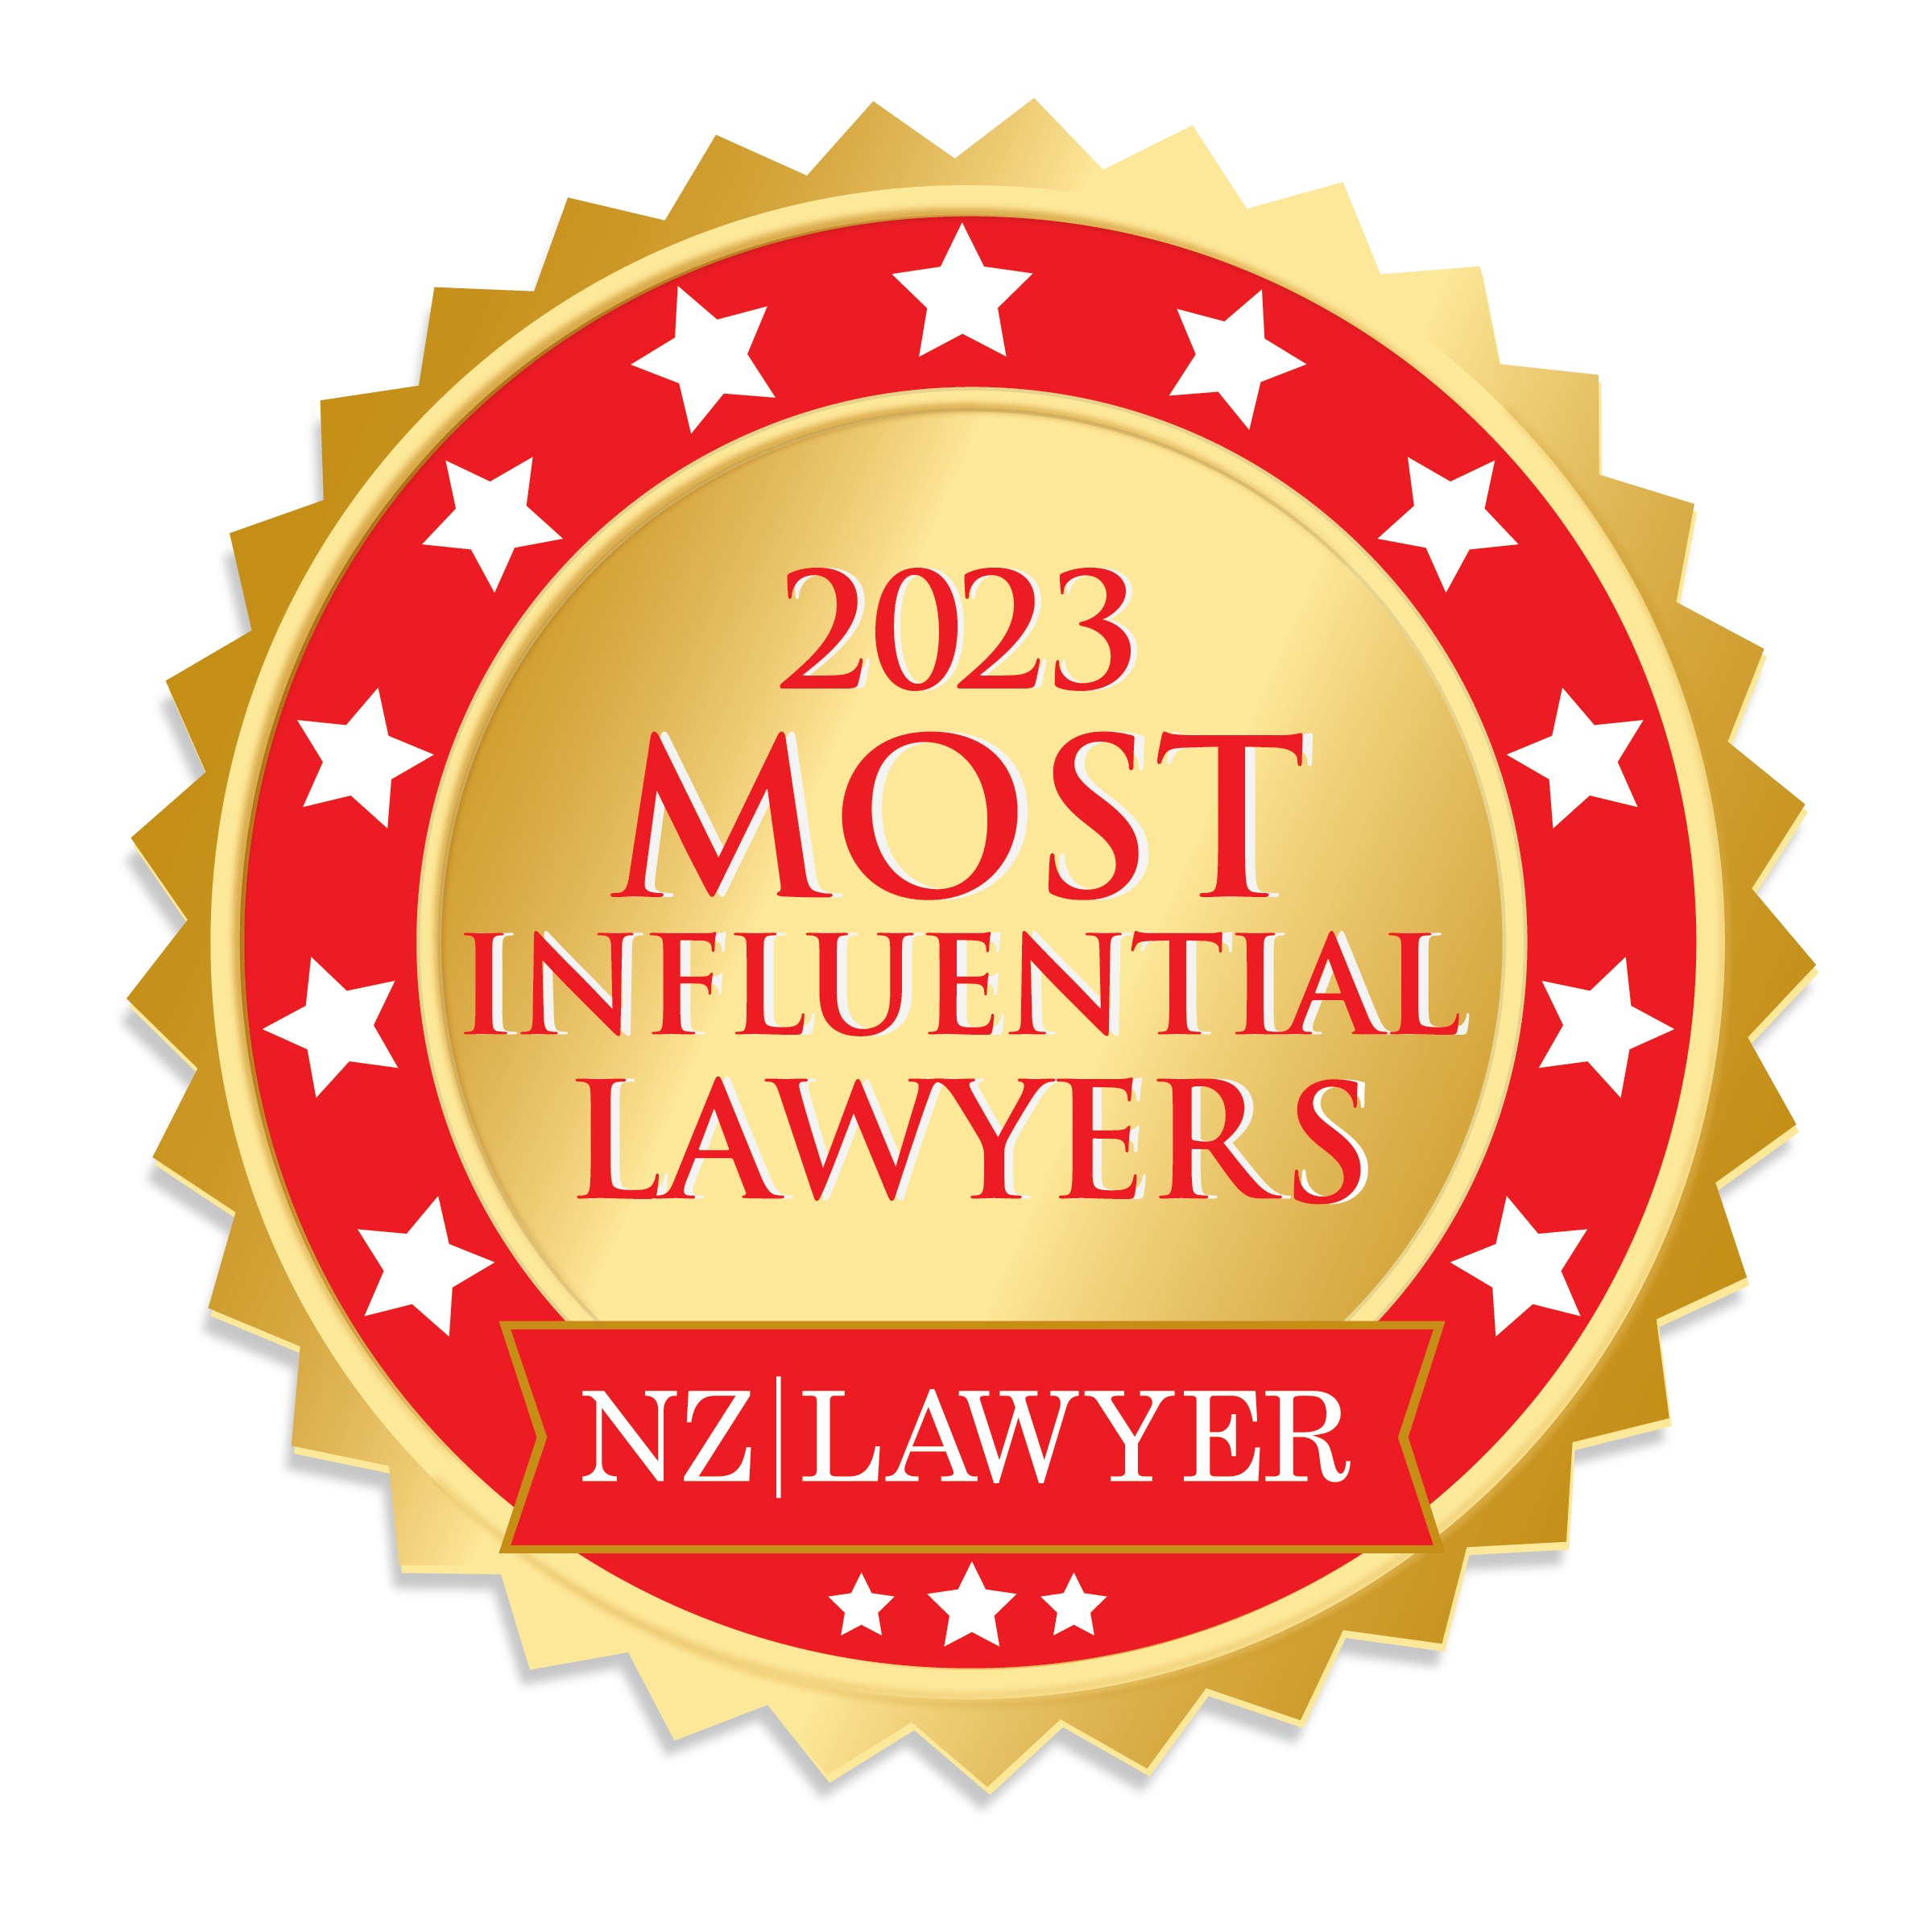 The Most Influential Lawyers in New Zealand | Most Influential Lawyers 2023